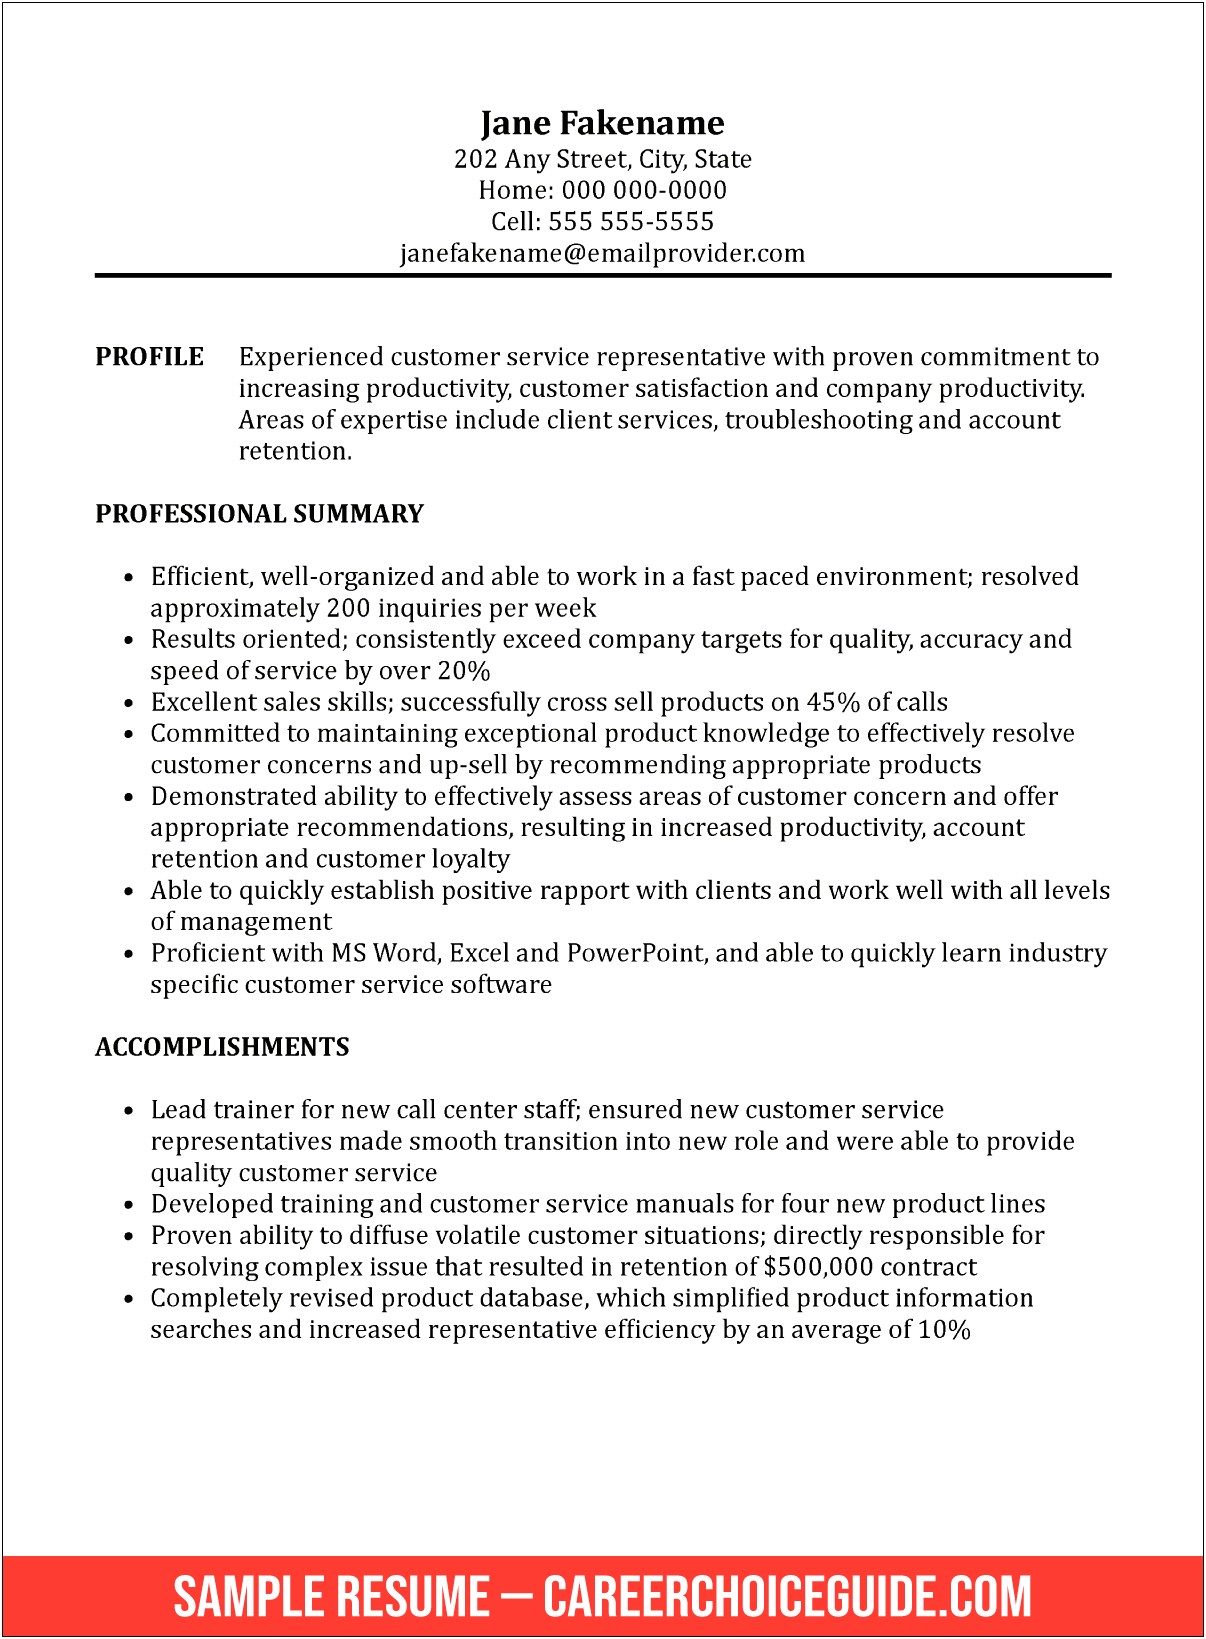 Resume Qualifications Summary For Customer Service